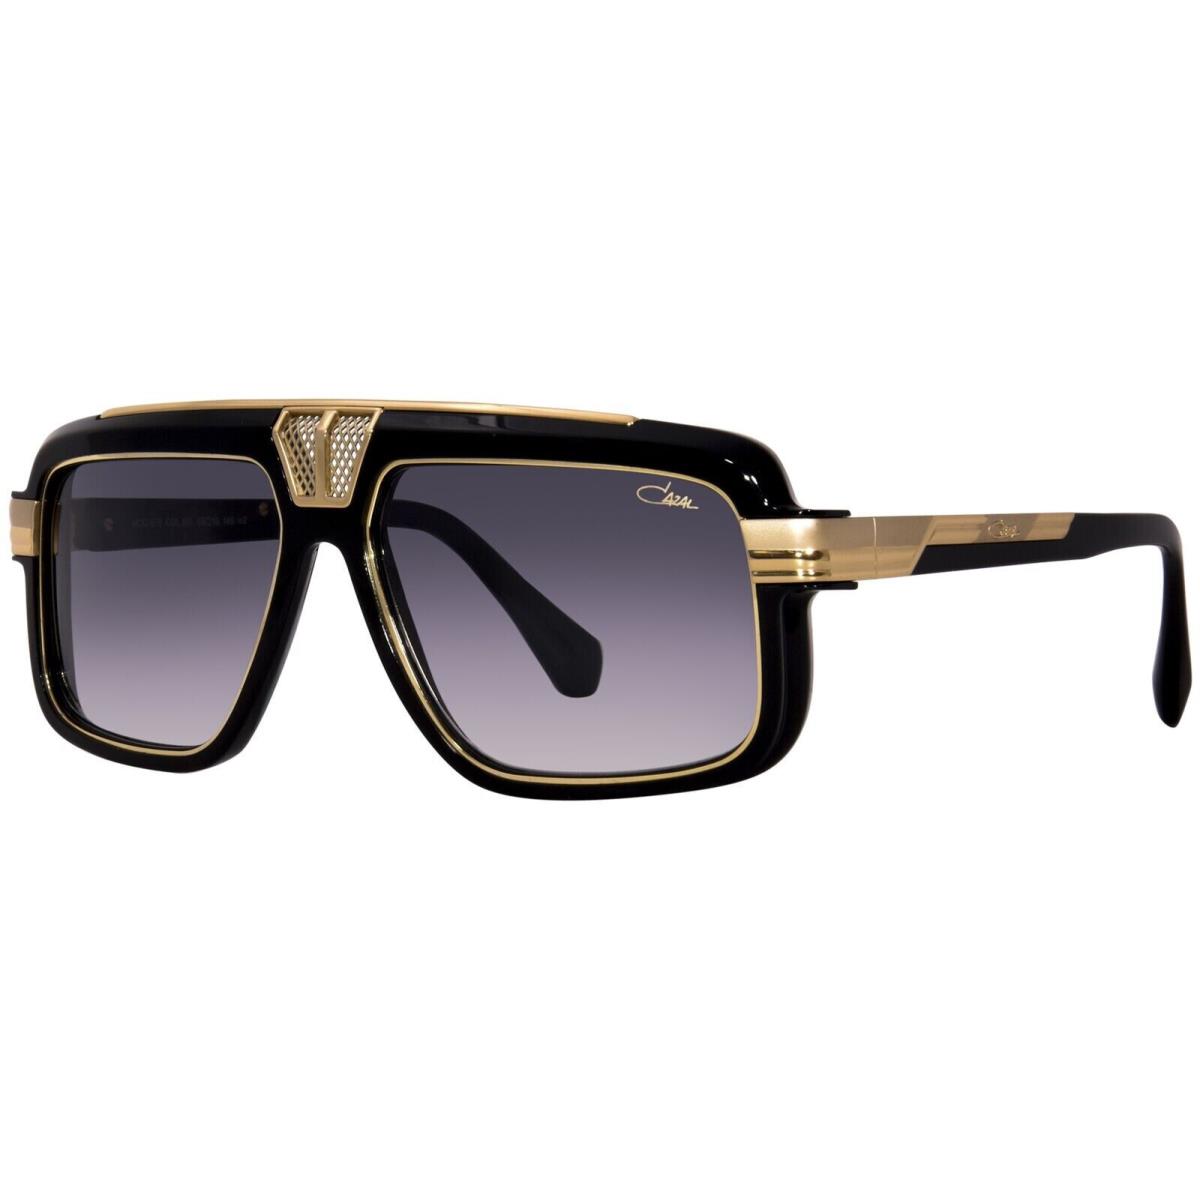 Cazal Legends Mod. 678 Col. 001 Black Gold Sunglasses Made IN Germany